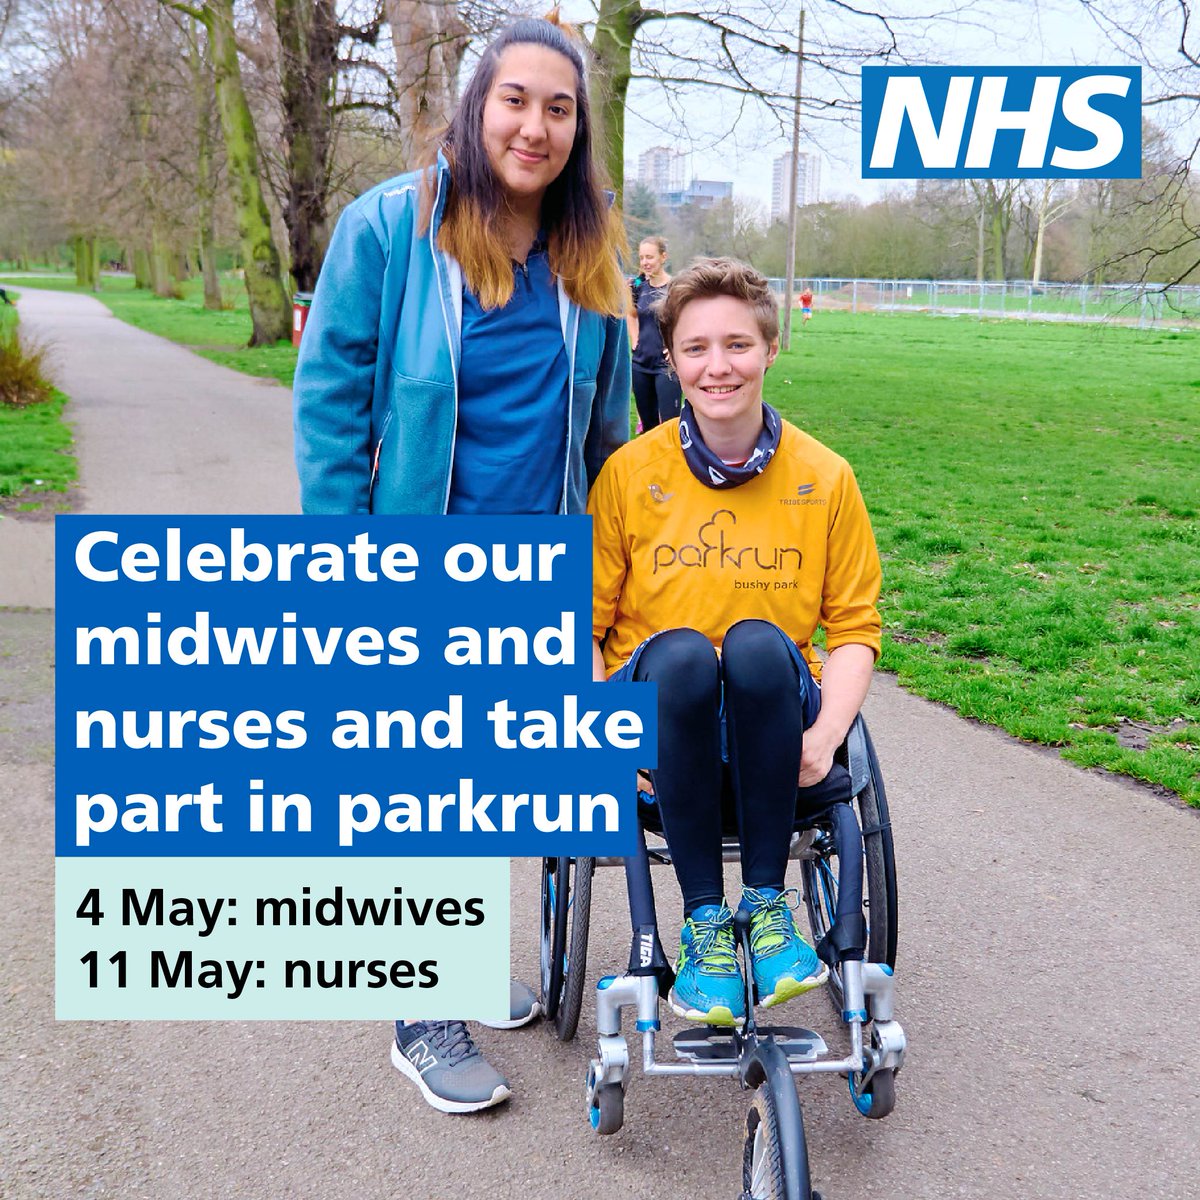 Take part in a local @parkrunUK event on 4 May to mark International Day of the Midwife #IDM2024 and 11 May for International Nurses Day #IND2024.

You can walk, jog, run or volunteer as we recognise and thank our #teamCMidOmidwives and #teamCNO nurses. parkrun.org.uk/register/